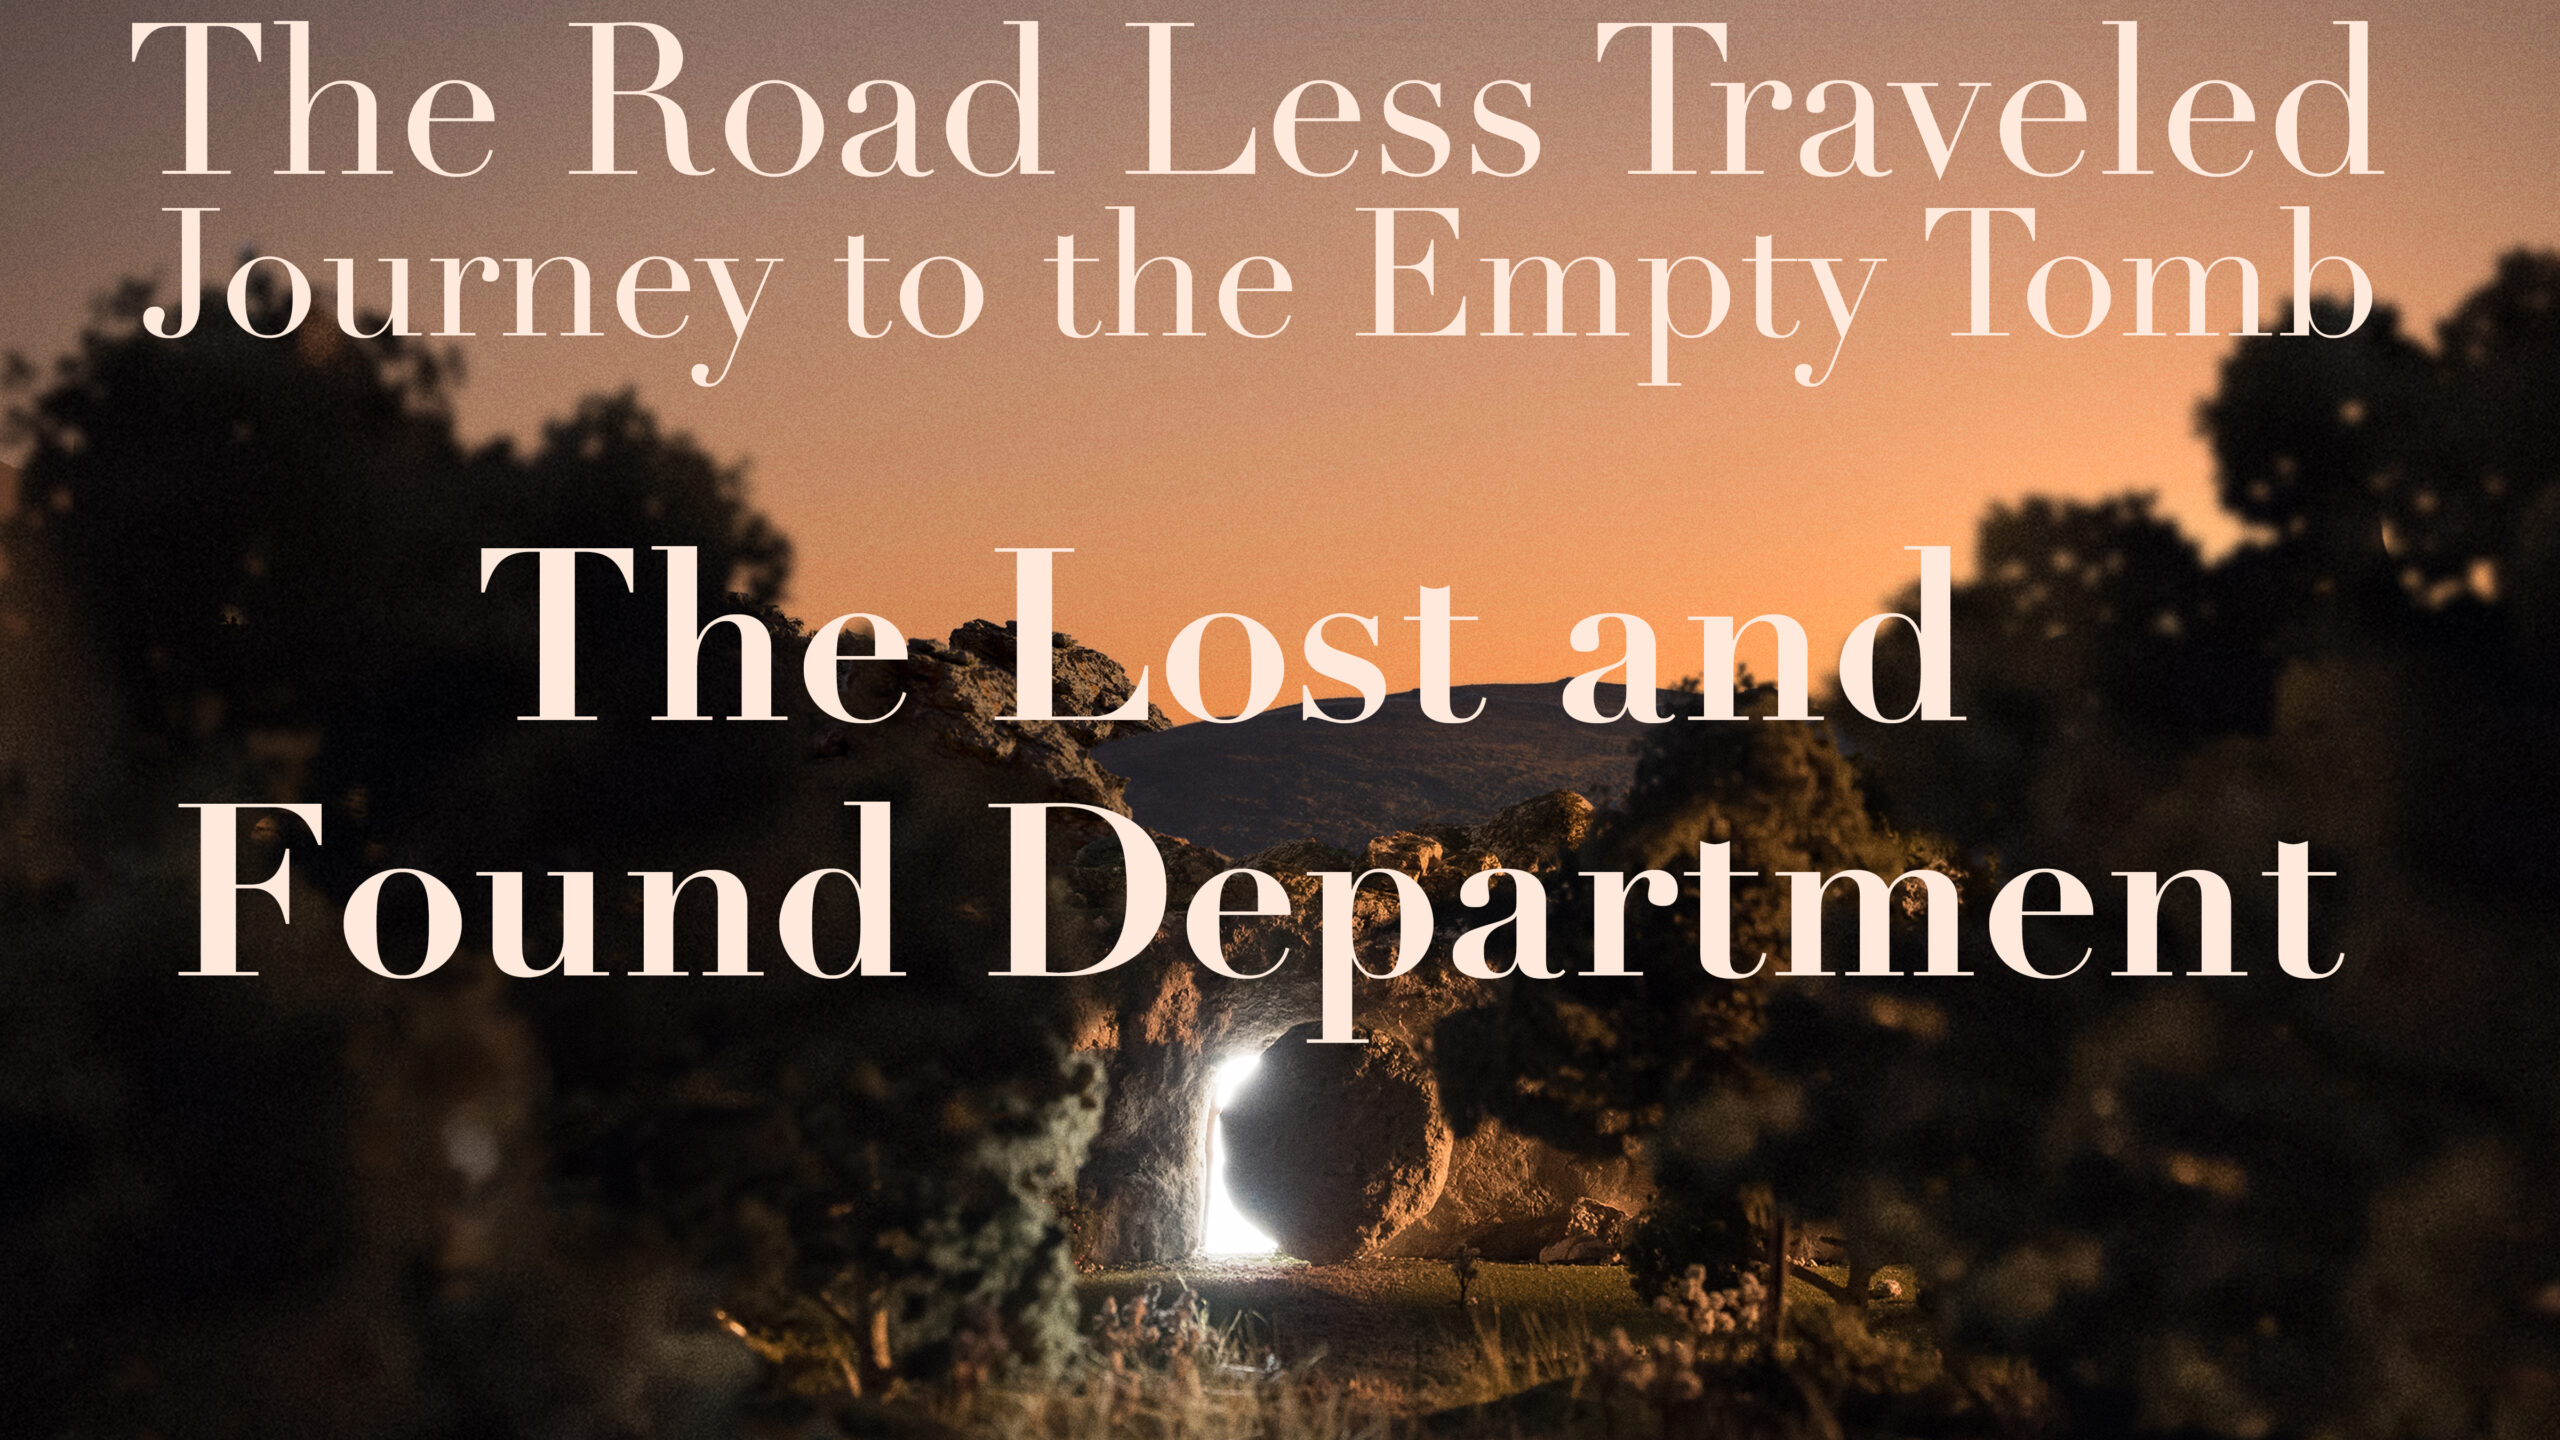 The Road Less Traveled - Journey to the Empty Tomb Part 2 "The Lost and Found Department" (Traditional)